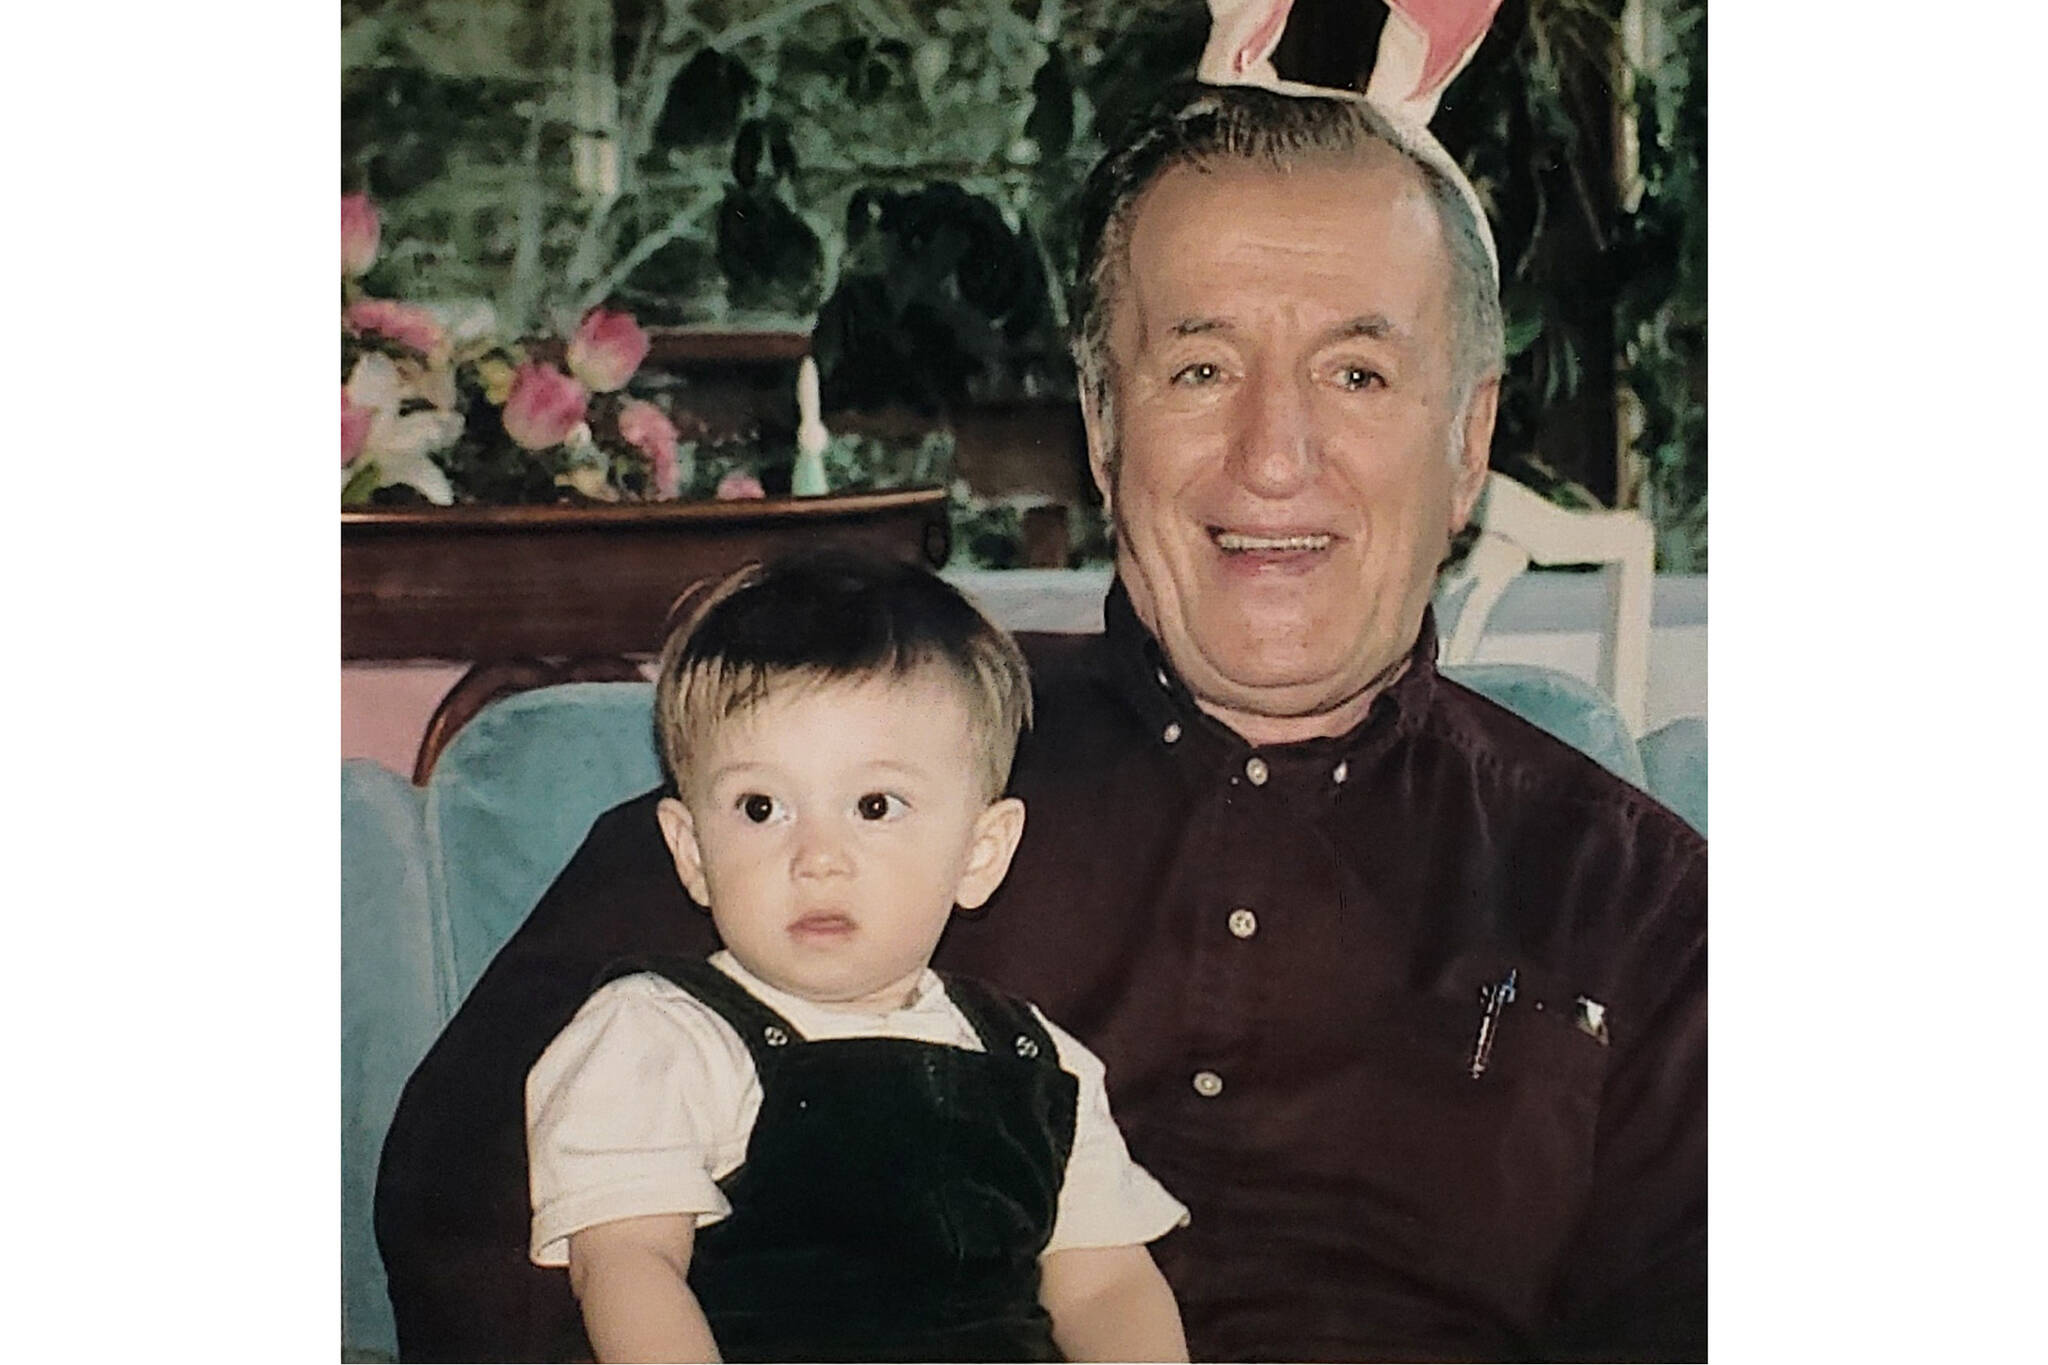 John Dapcevich is pictured here with his great-grandson, Max. (Courtesy Photo)